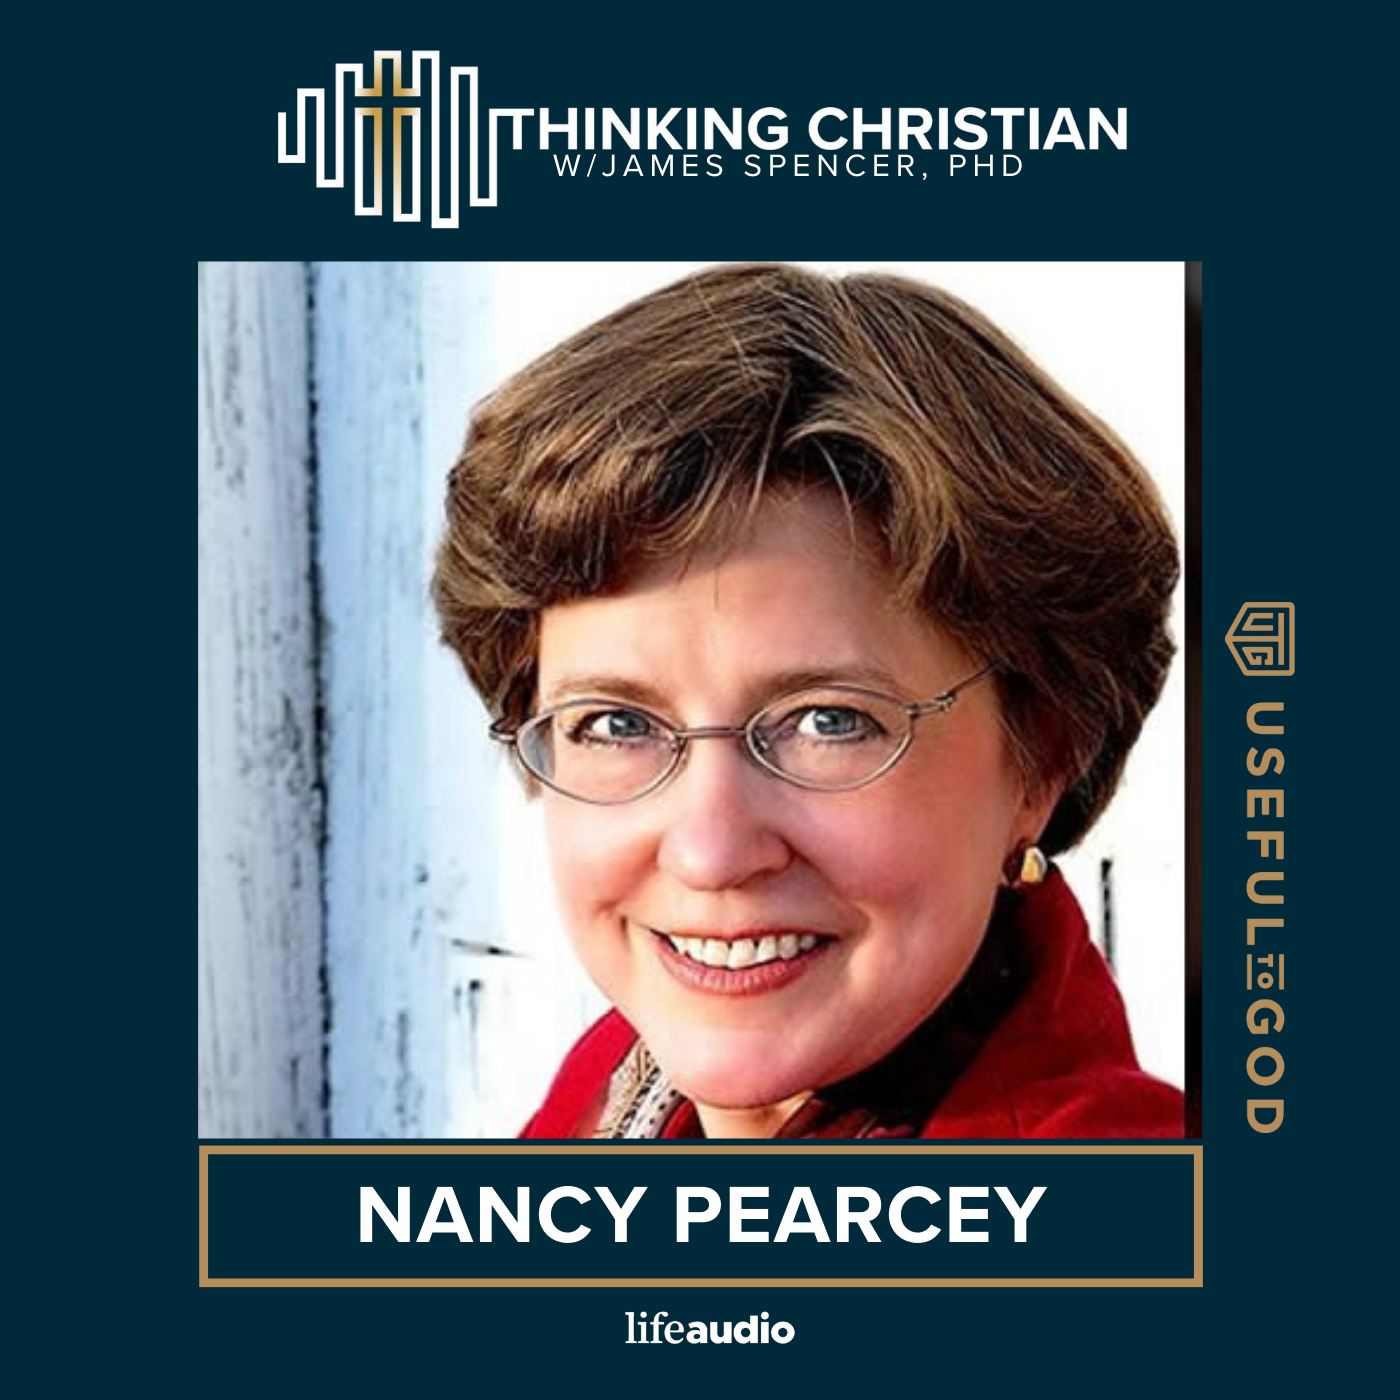 New Opportunities to Be A Different Kind of Man: A Conversation with Nancy Pearcey, Pt 2